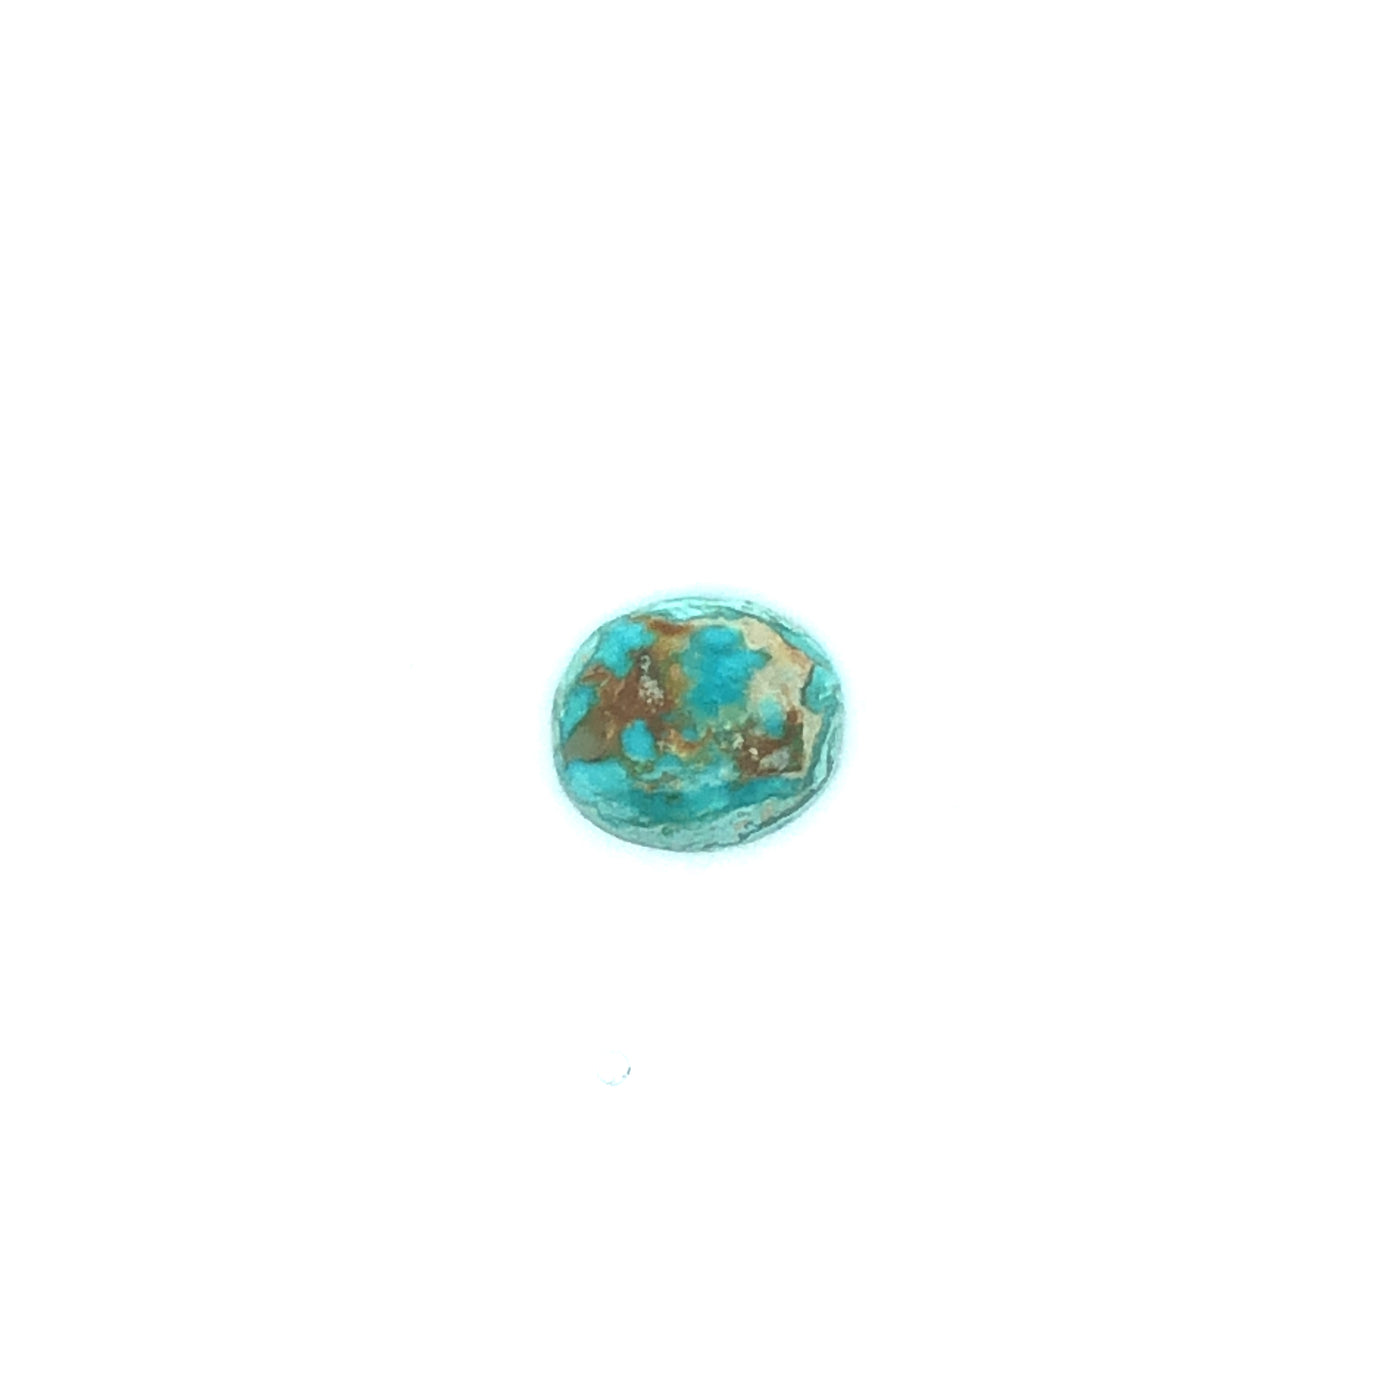 Loose Narooma Turquoise Oval Shaped 4.58Ct Blue With Brown